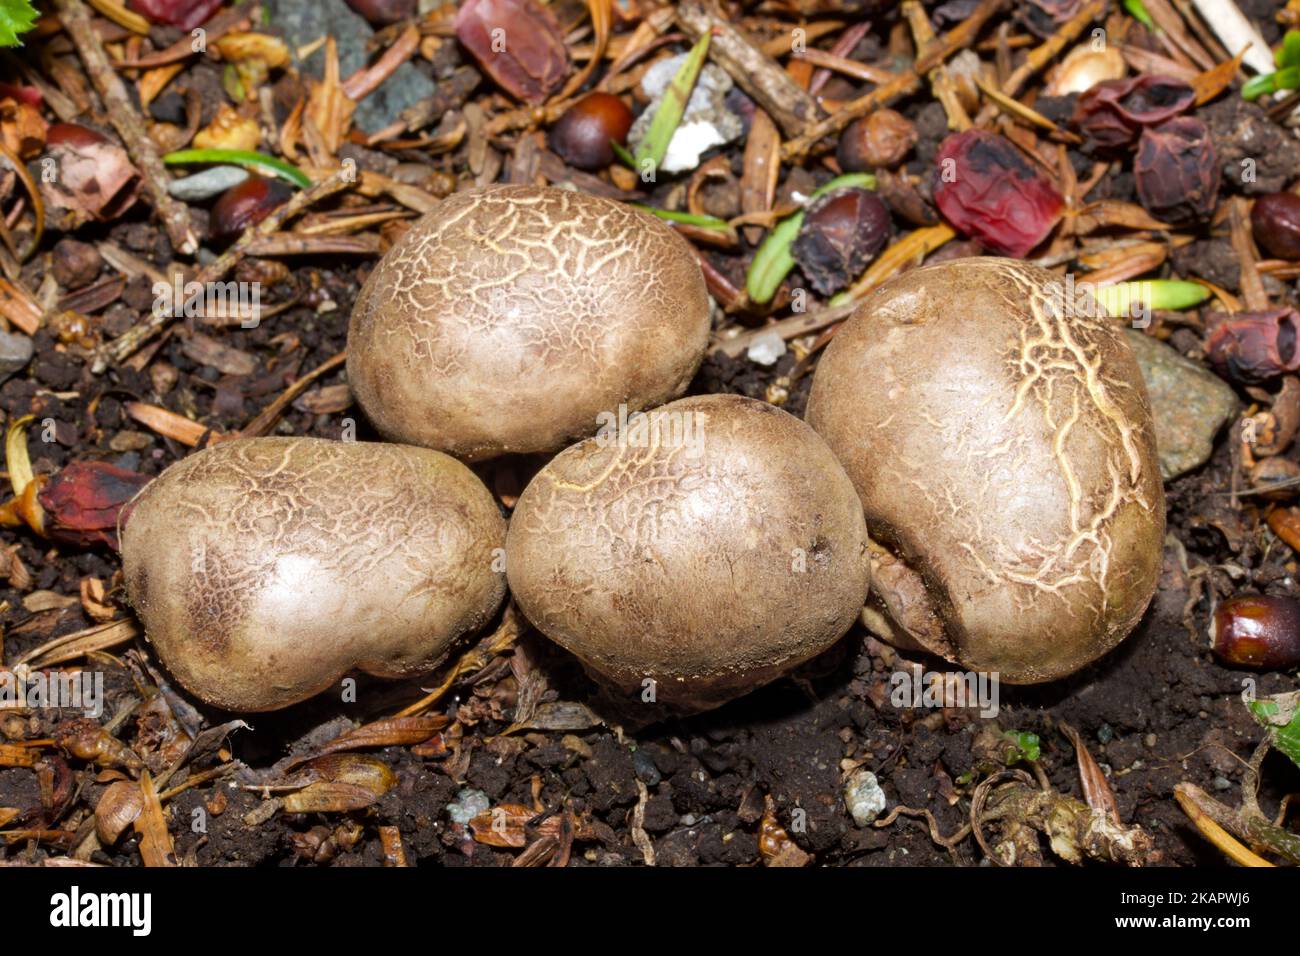 Rhizopogon cf luteolus (yellow false truffle) occurs in pine woodland on sandy soil throughout much of Europe. Stock Photo